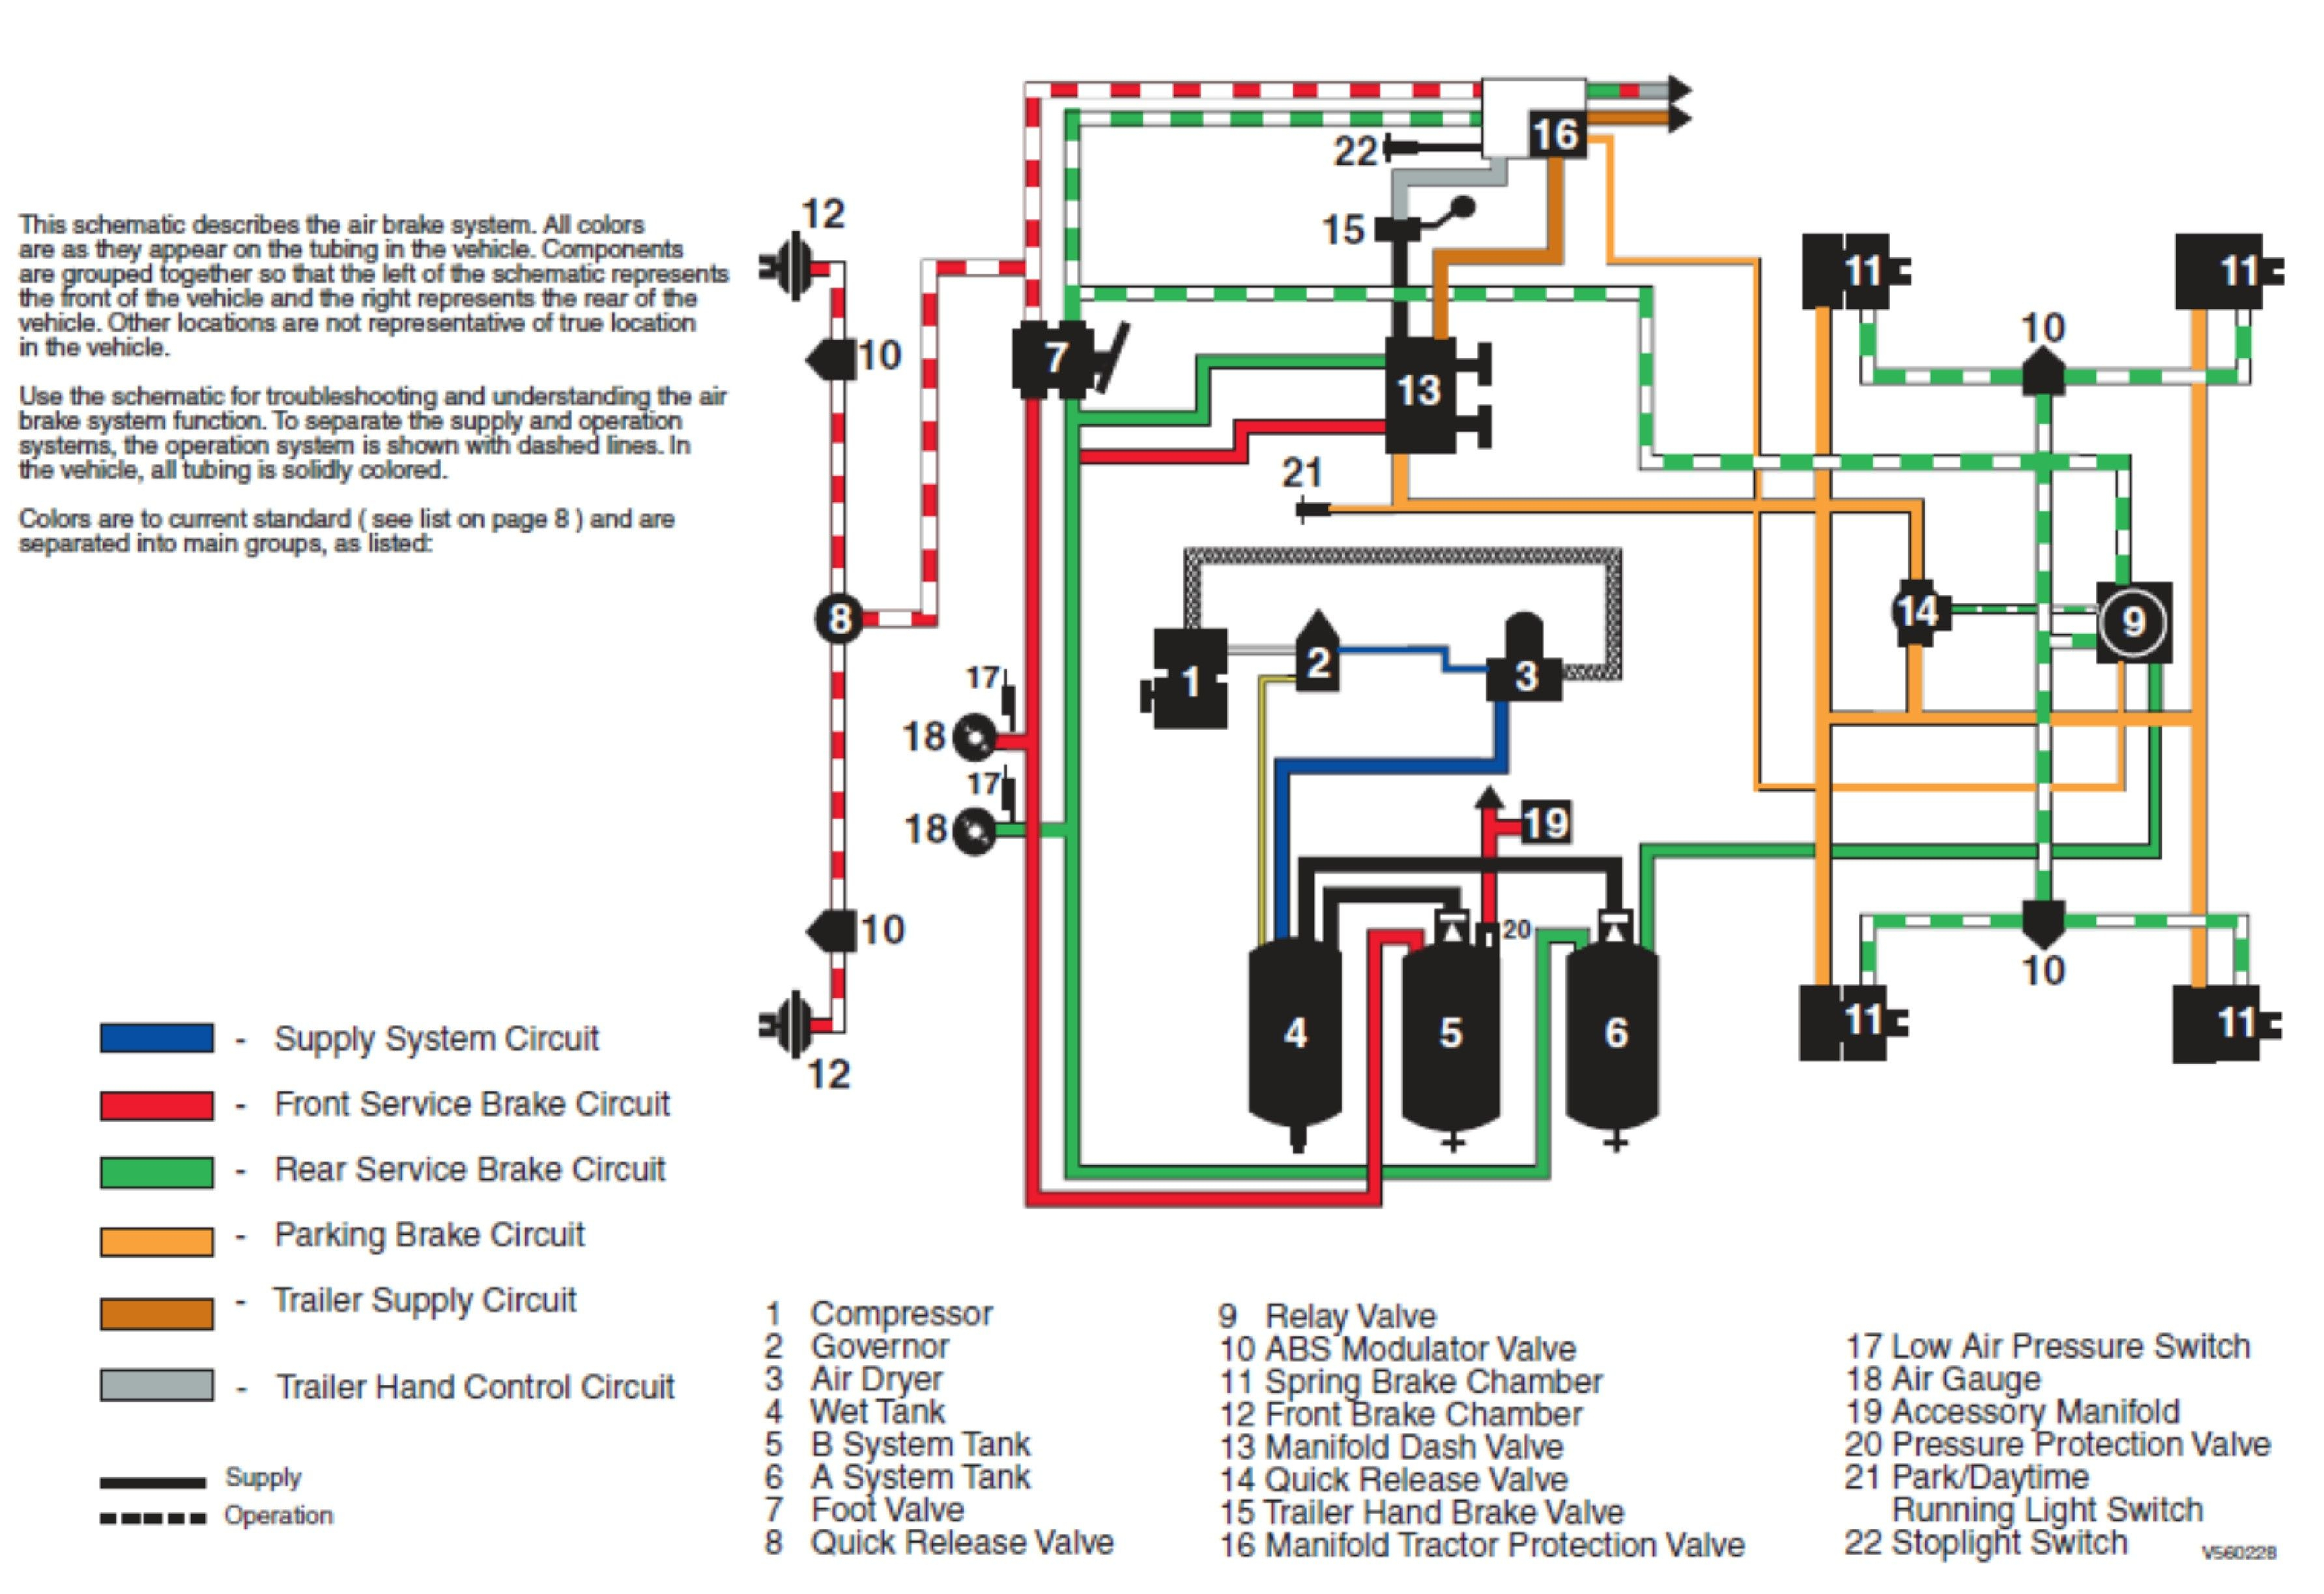 Freightliner Chassis Wiring Diagram Freightliner Rv Wiring Diagram Today Diagram Database